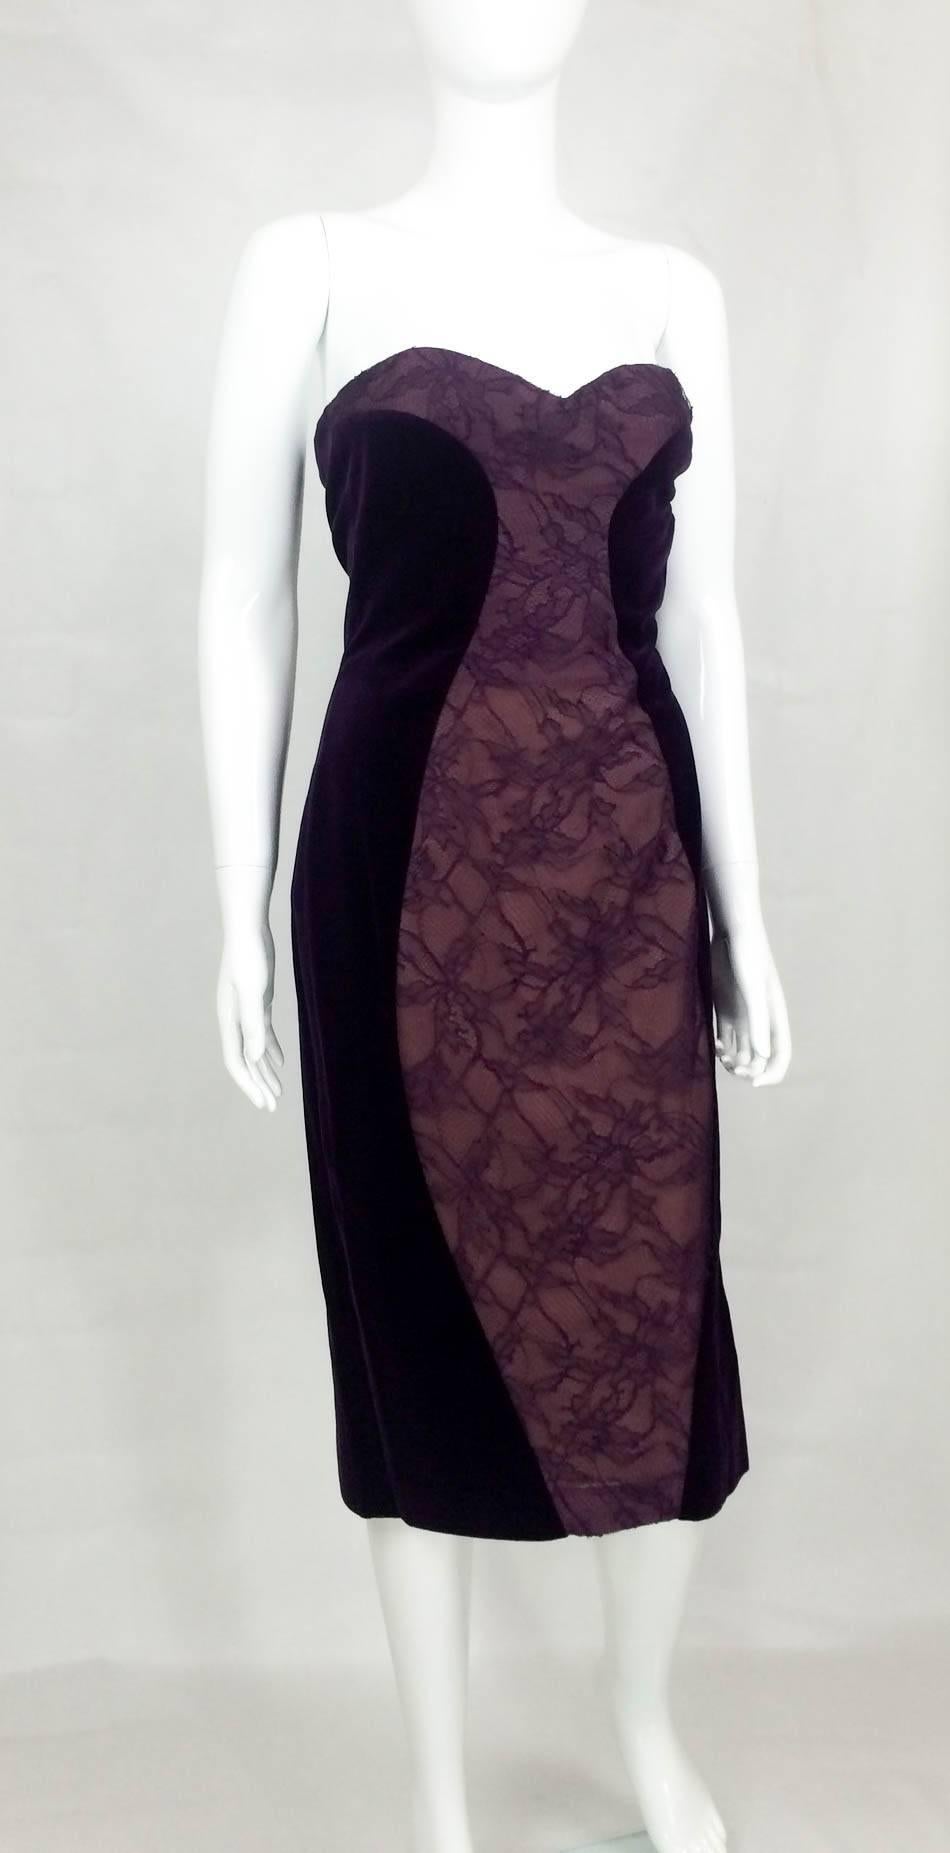 Stylish Paco Rabanne Velvet and Lace Dress. This great looking dress was made, we believe, as a prototype in the late 70s, early 80s. In purple velvet and lace it a very clever panel technique that gives a beautiful and sexy silhouette. This